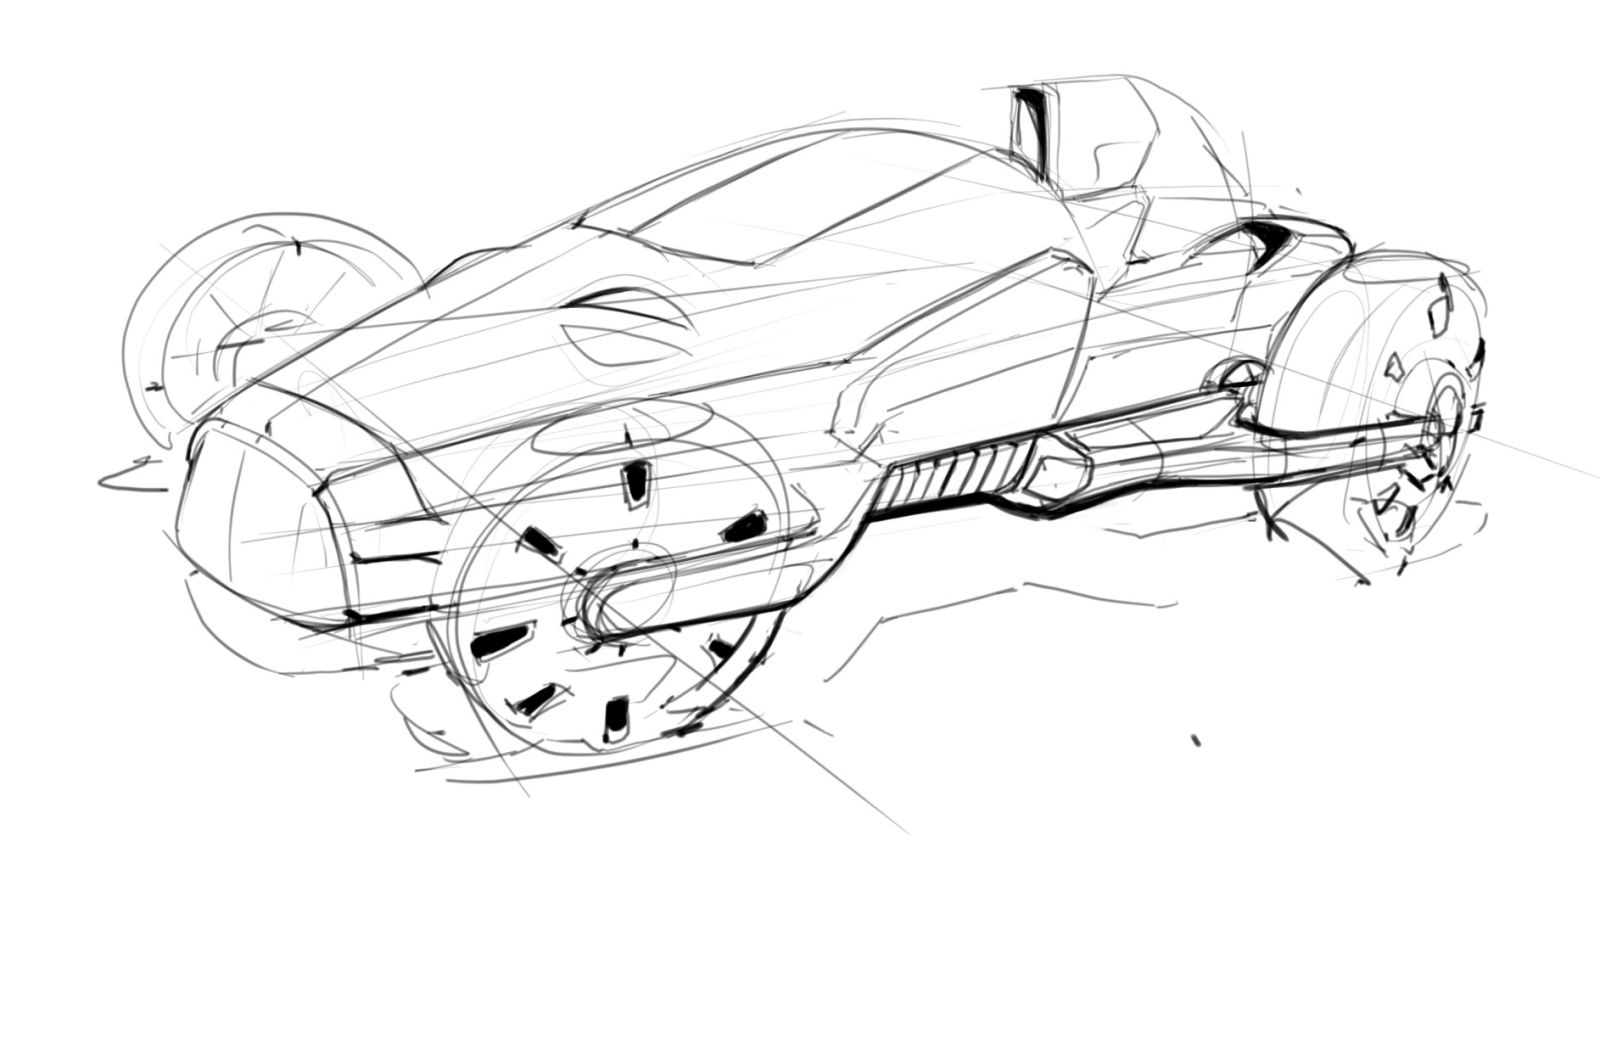 Illustration for article titled Do you like cars? Do you like Star Wars? Of course you do.